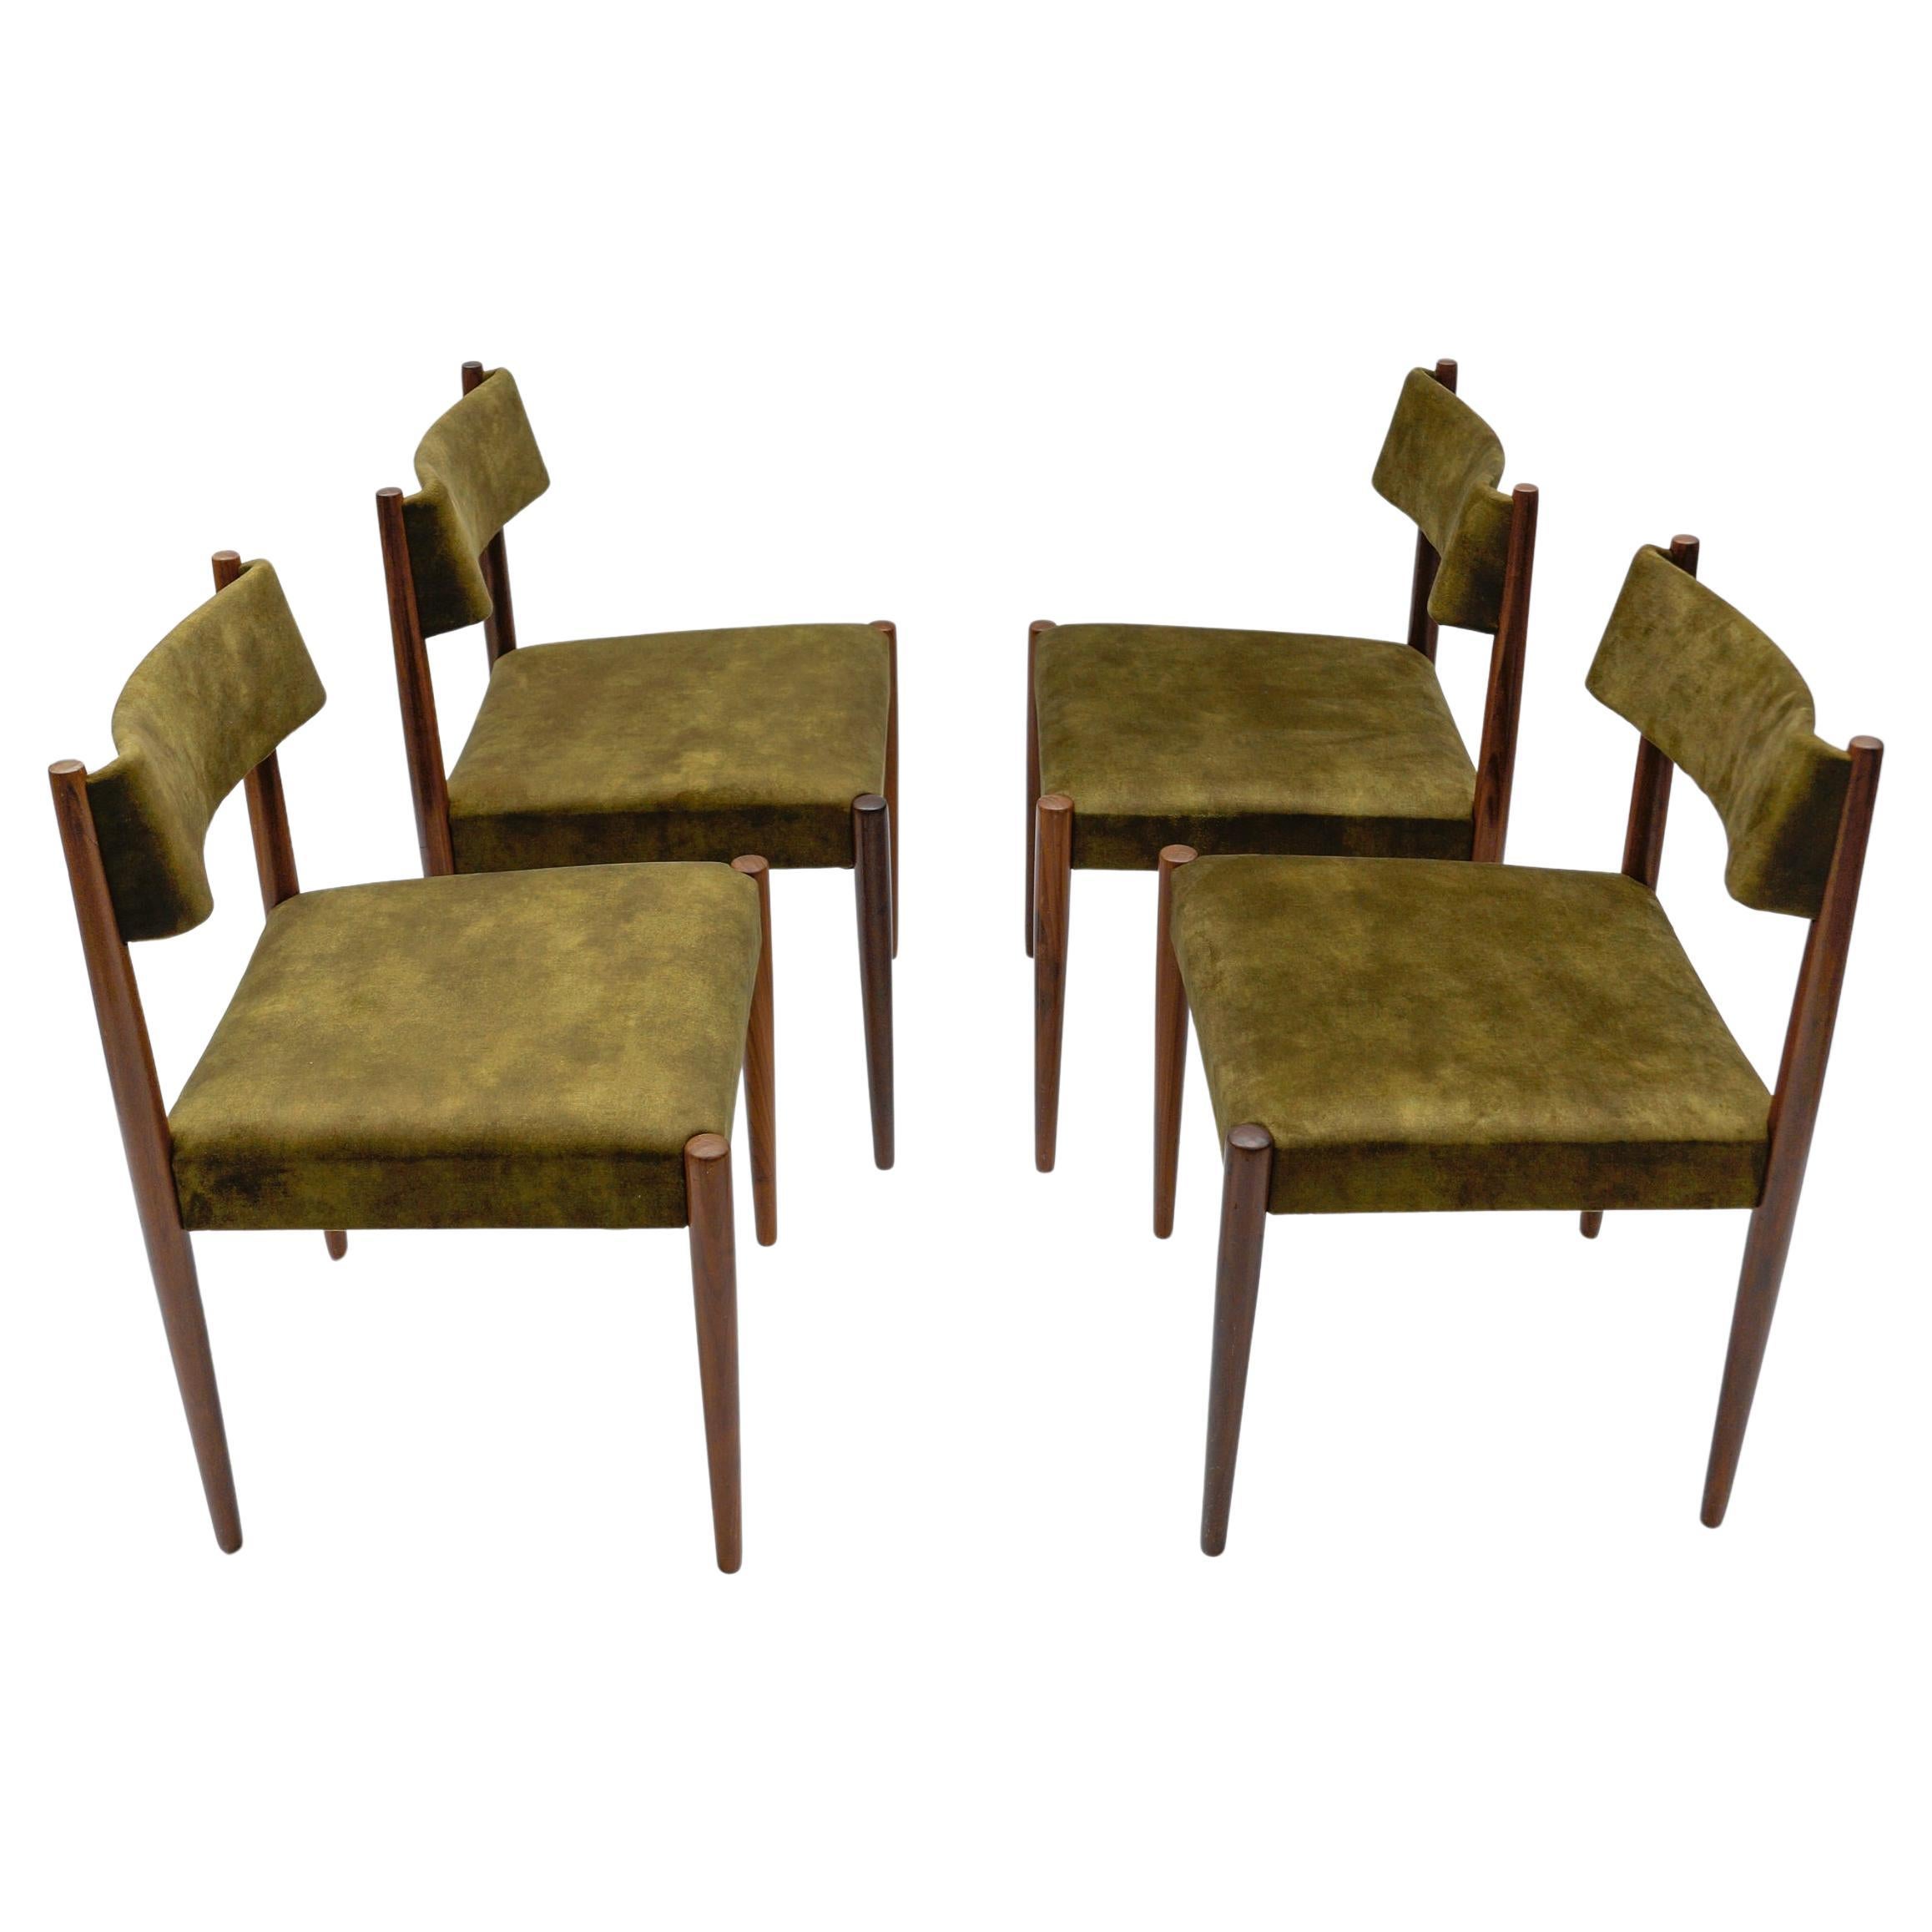 Four Wooden Scandinavian Dining Room Chairs, 1960s For Sale